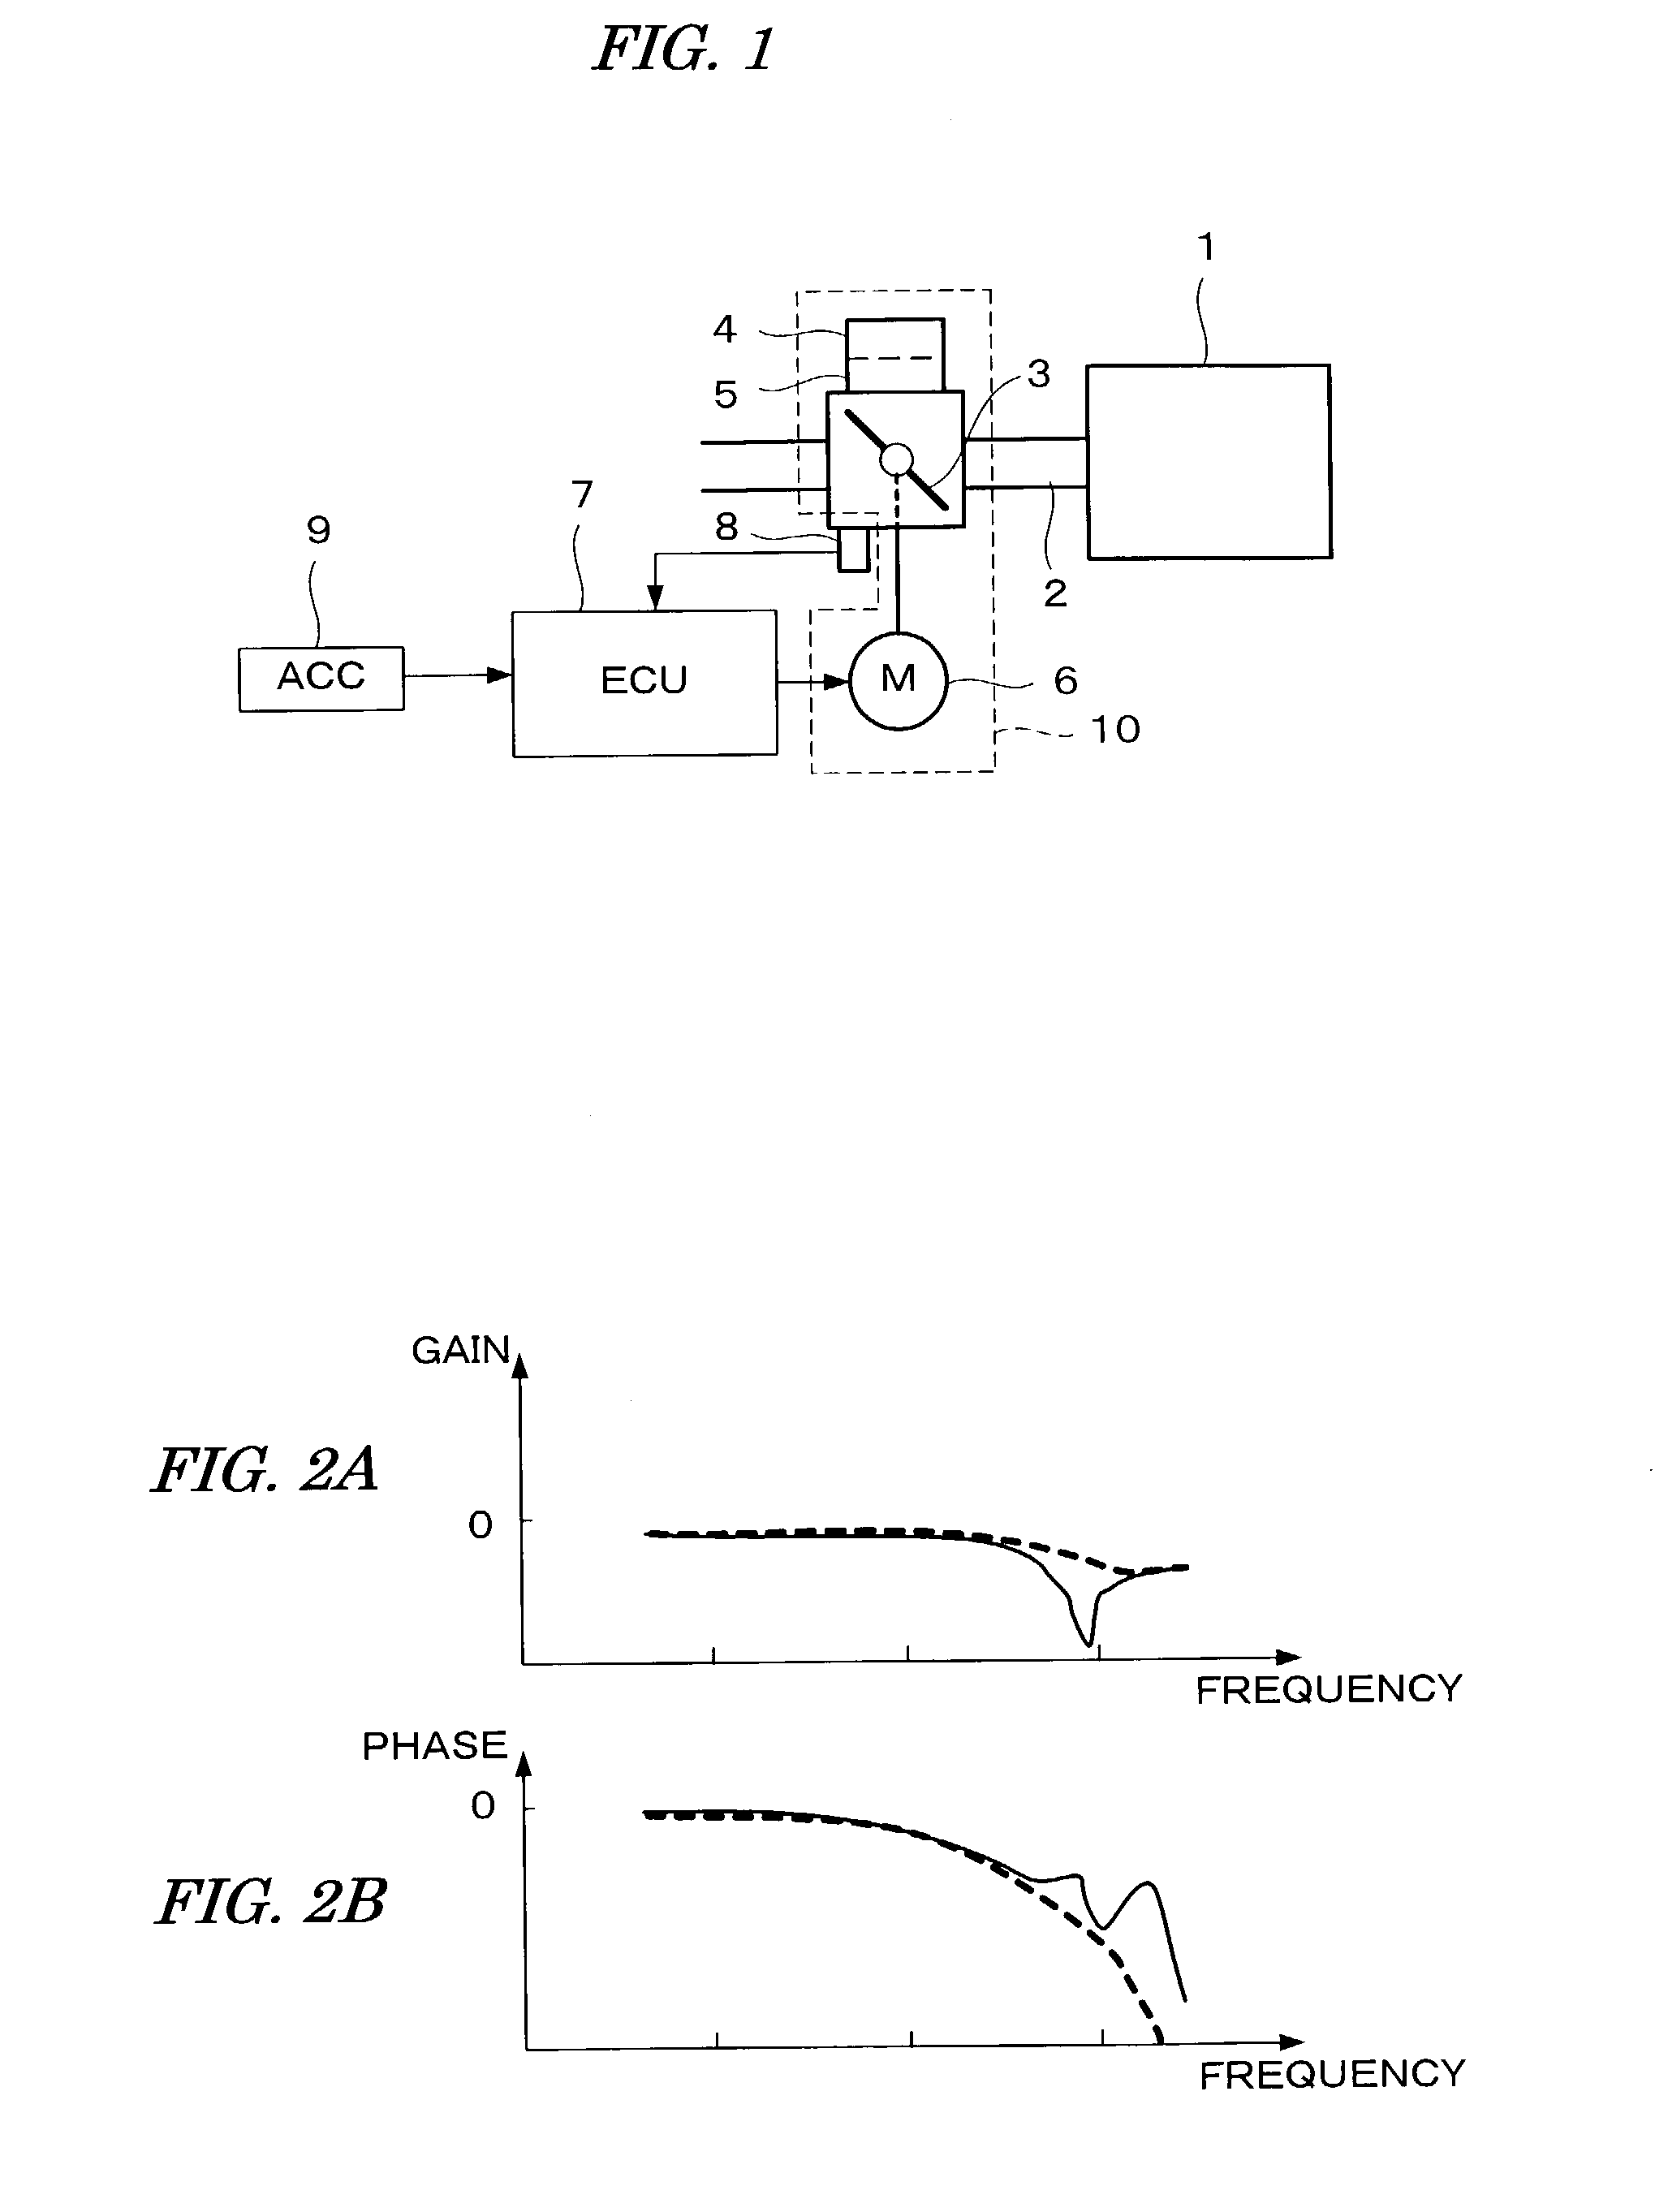 Control system for a plant using identified model parameters